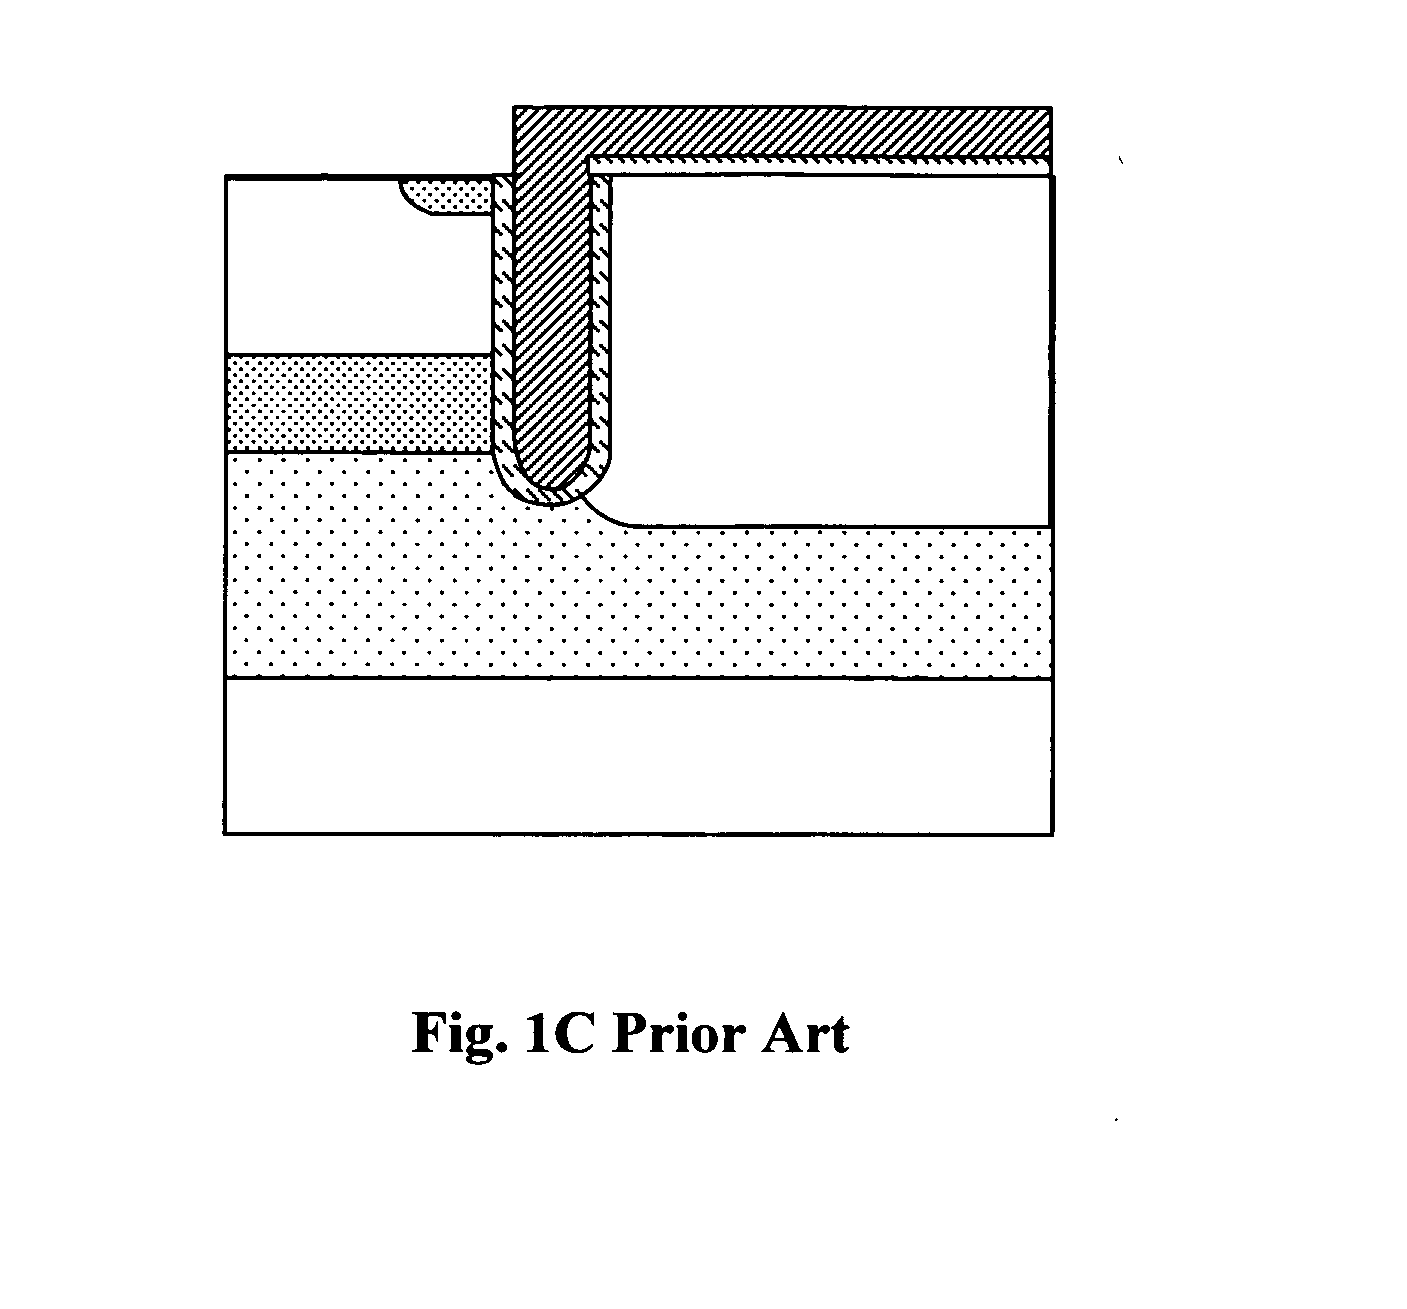 Topside structures for an insulated gate bipolar transistor (IGBT) device to achieve improved device performances